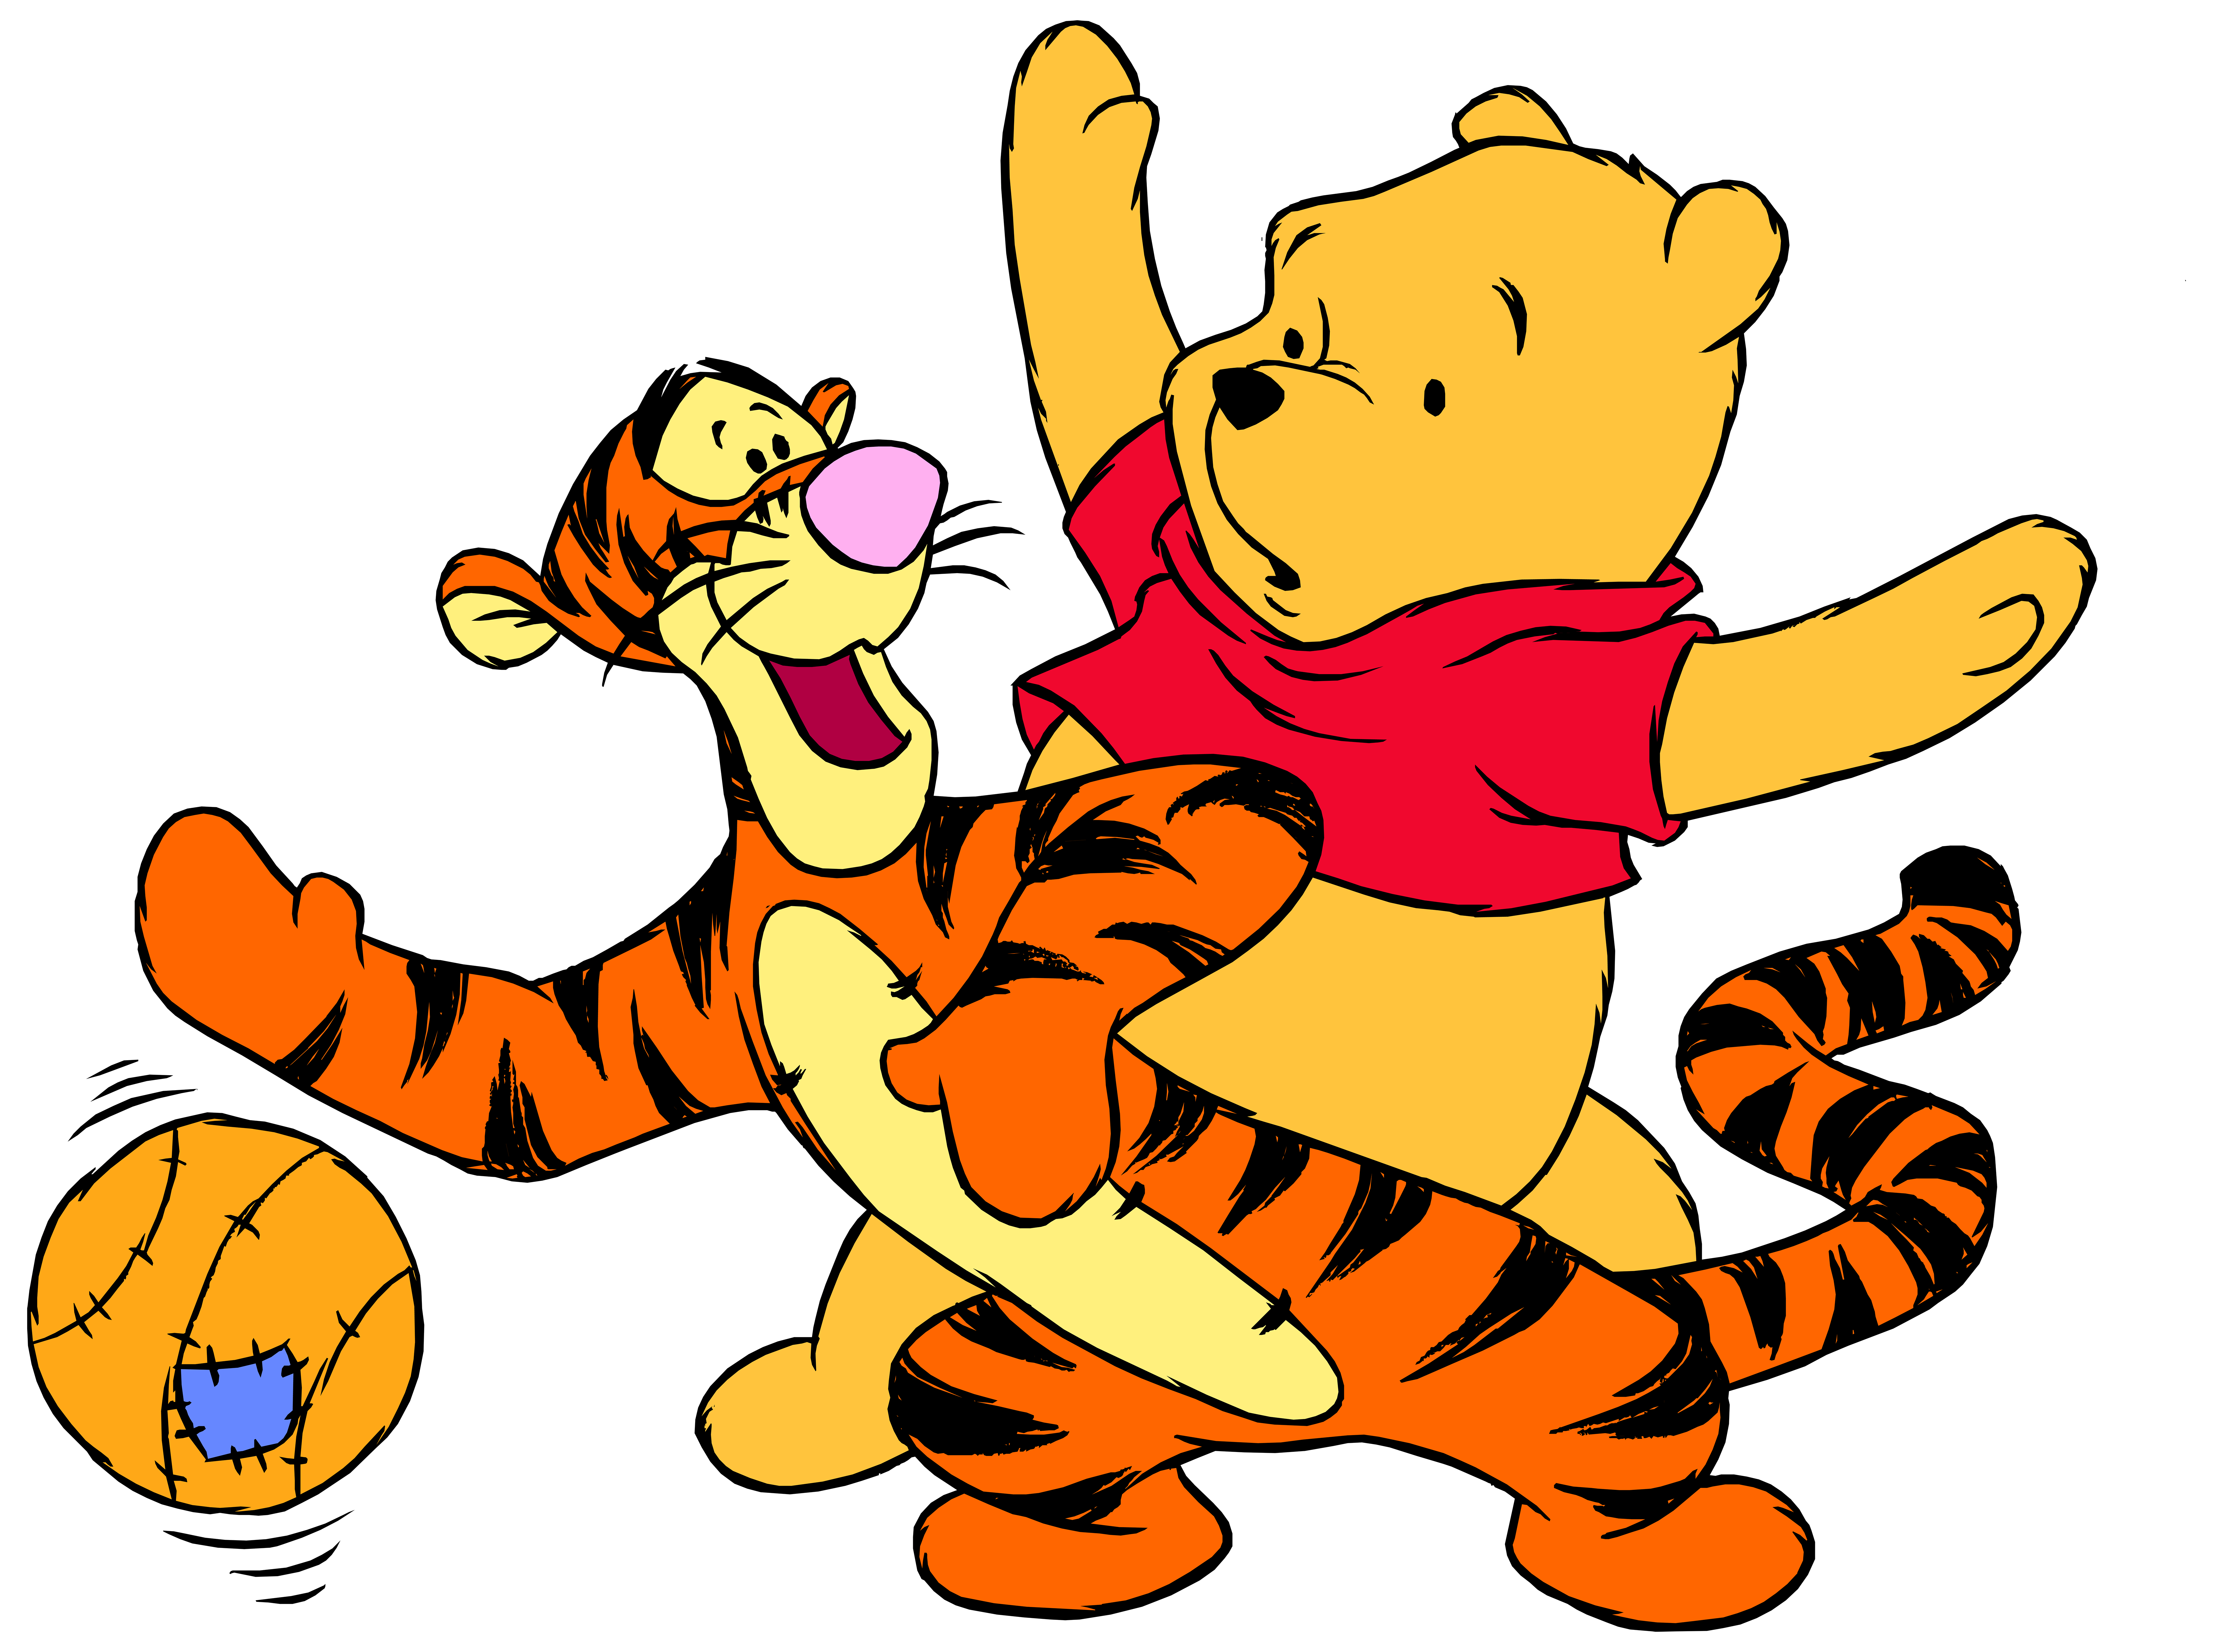 pooh images free download